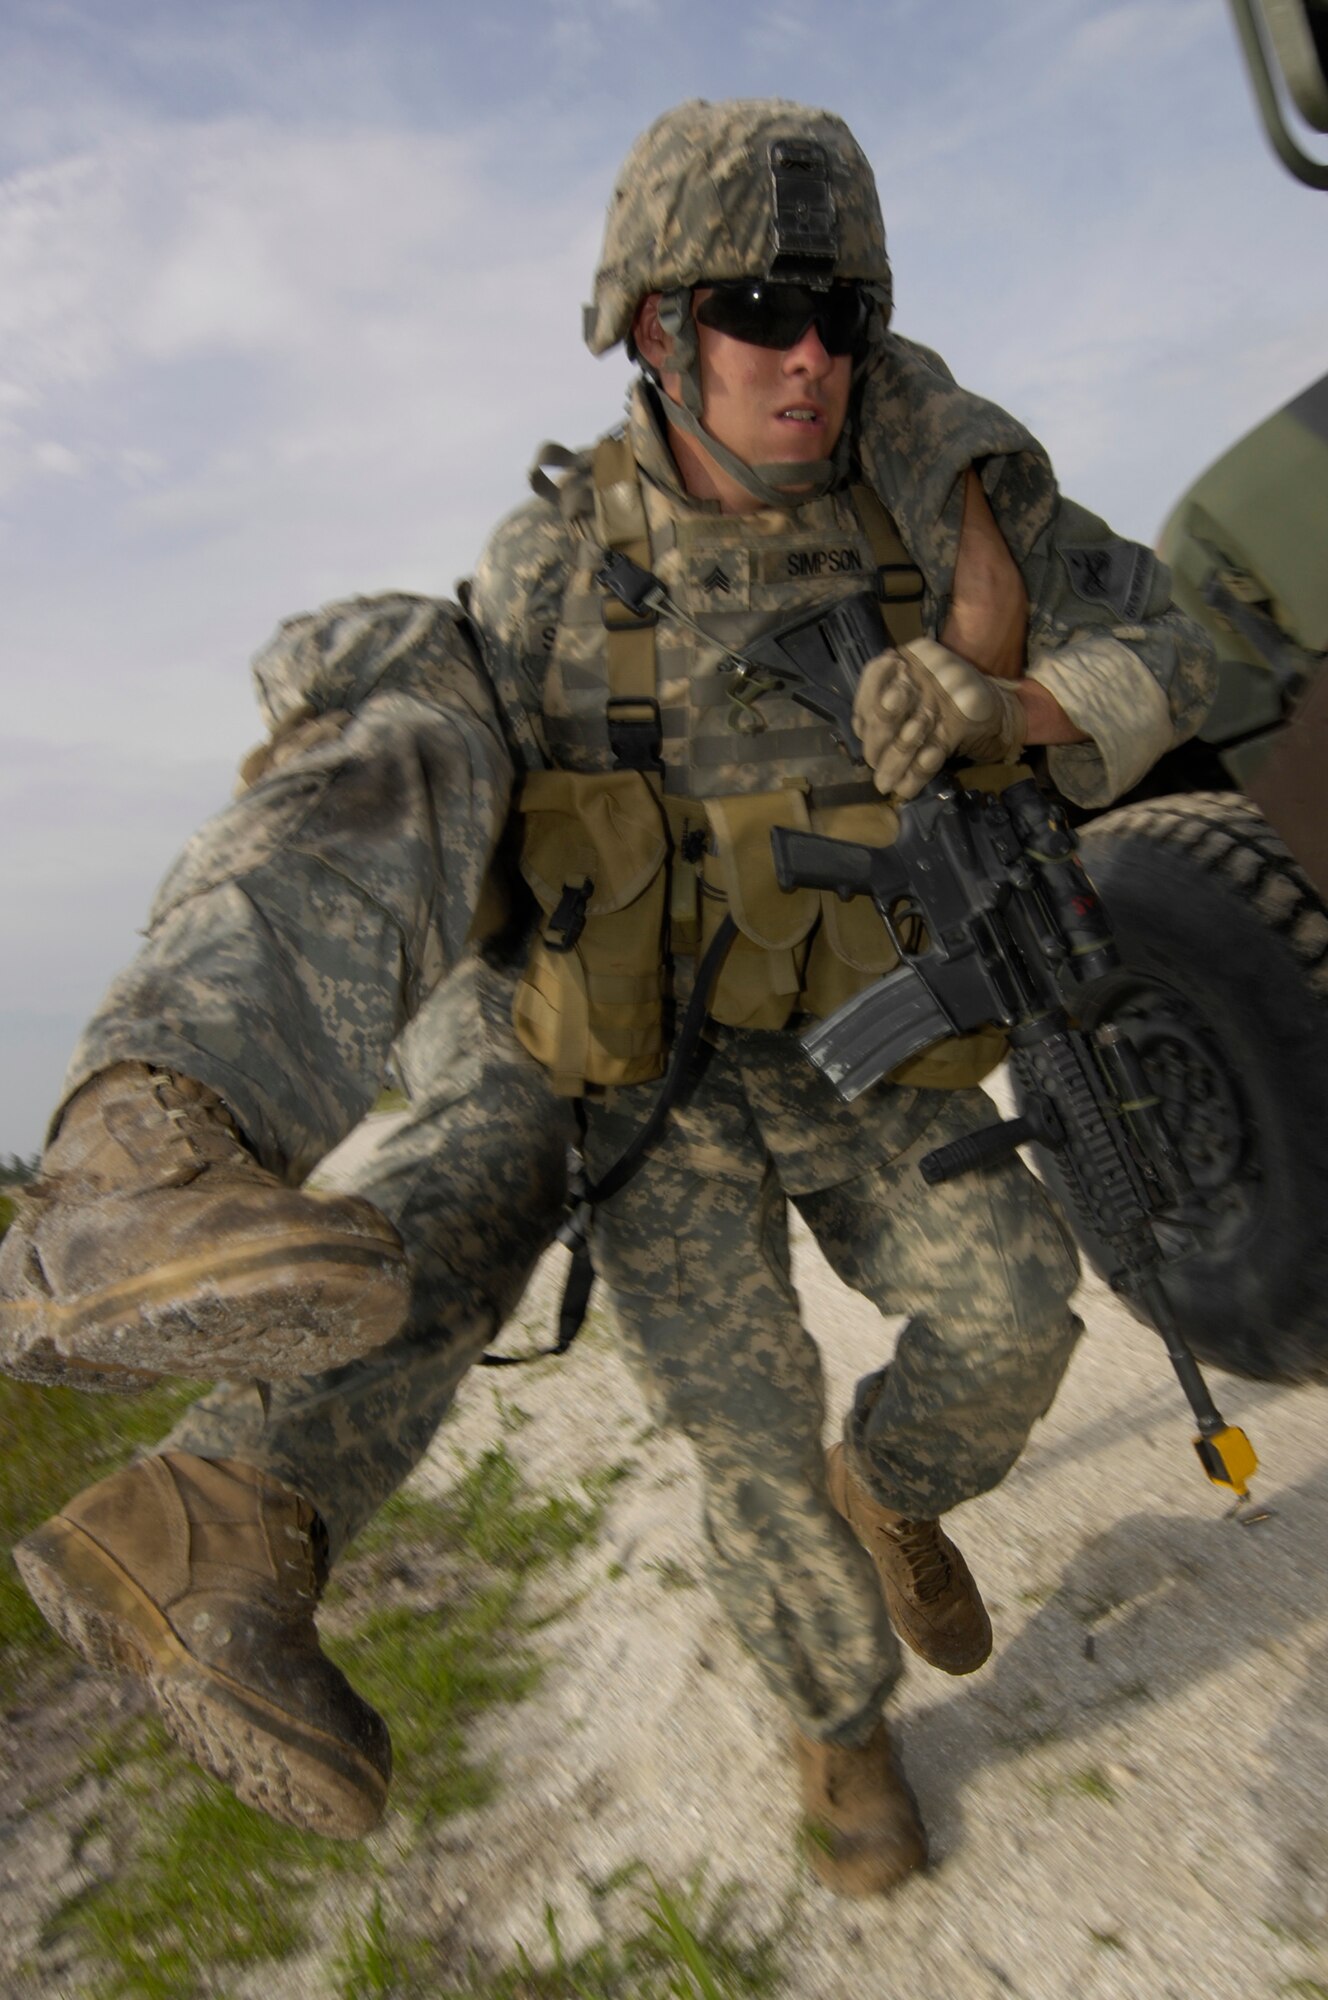 No man left behind. A U.S. Army soldier from the 4th Brigade Combat Team, 1st Armored Division, carries a wounded soldier to safety during Atlantic Strike VII, June 16, 2008. Atlantic Strike is a joint forces training event involving Joint Terminal Attack Controllers from the U.S. Army, Air Force and Marines  and is held semi-annually at Avon Park Air Ground training Complex, Avon Park, FL.(U.S. Air Force photo by Staff Sgt. Stephen J. Otero)